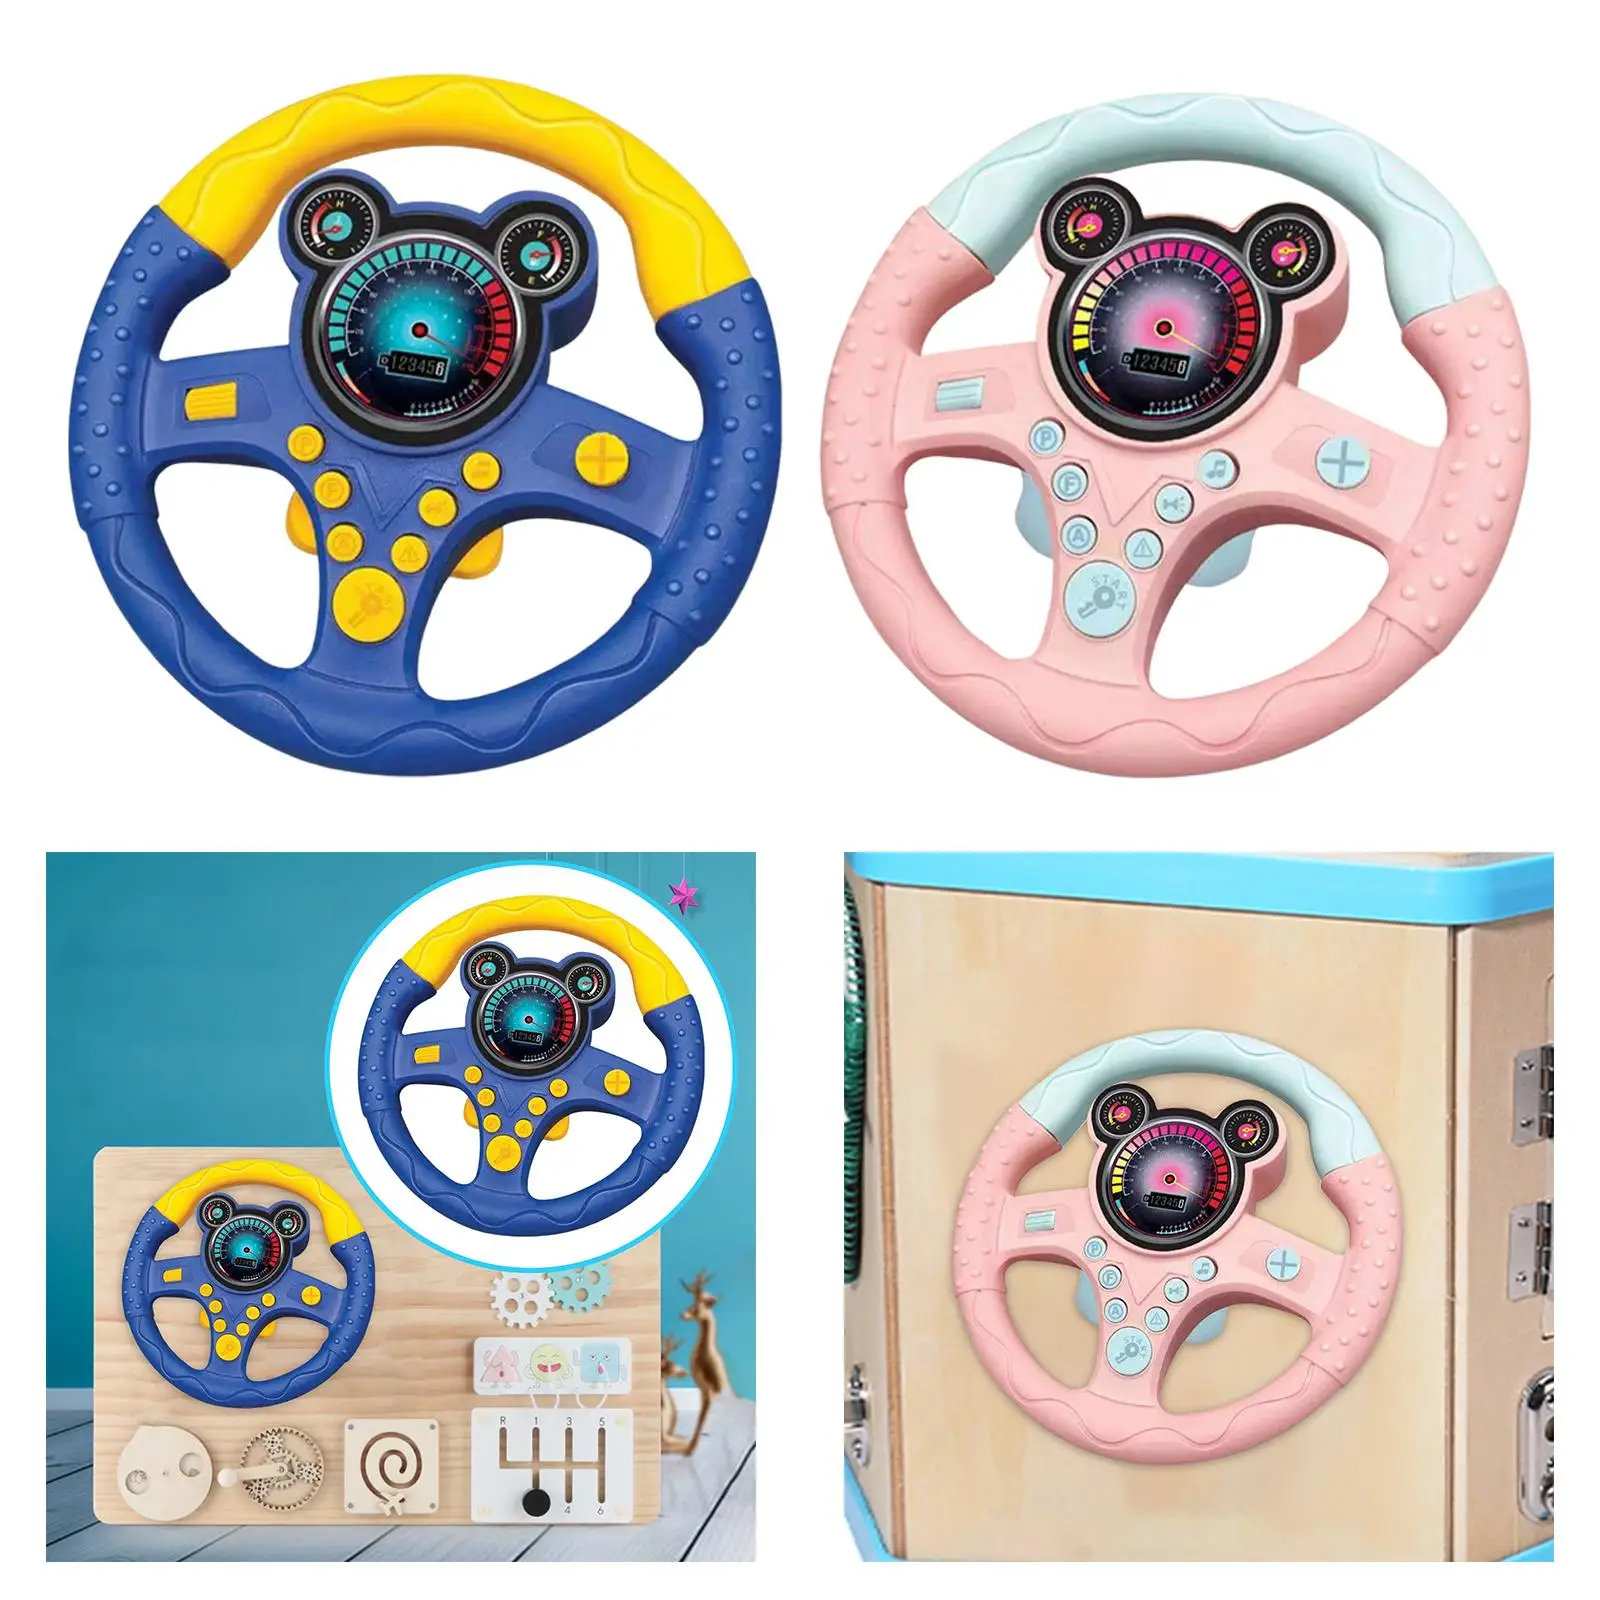 Round Steering Wheel Toy Educational Learning Toy Pretend Driving Toy for Park Backyard Climbing Frame Gifts